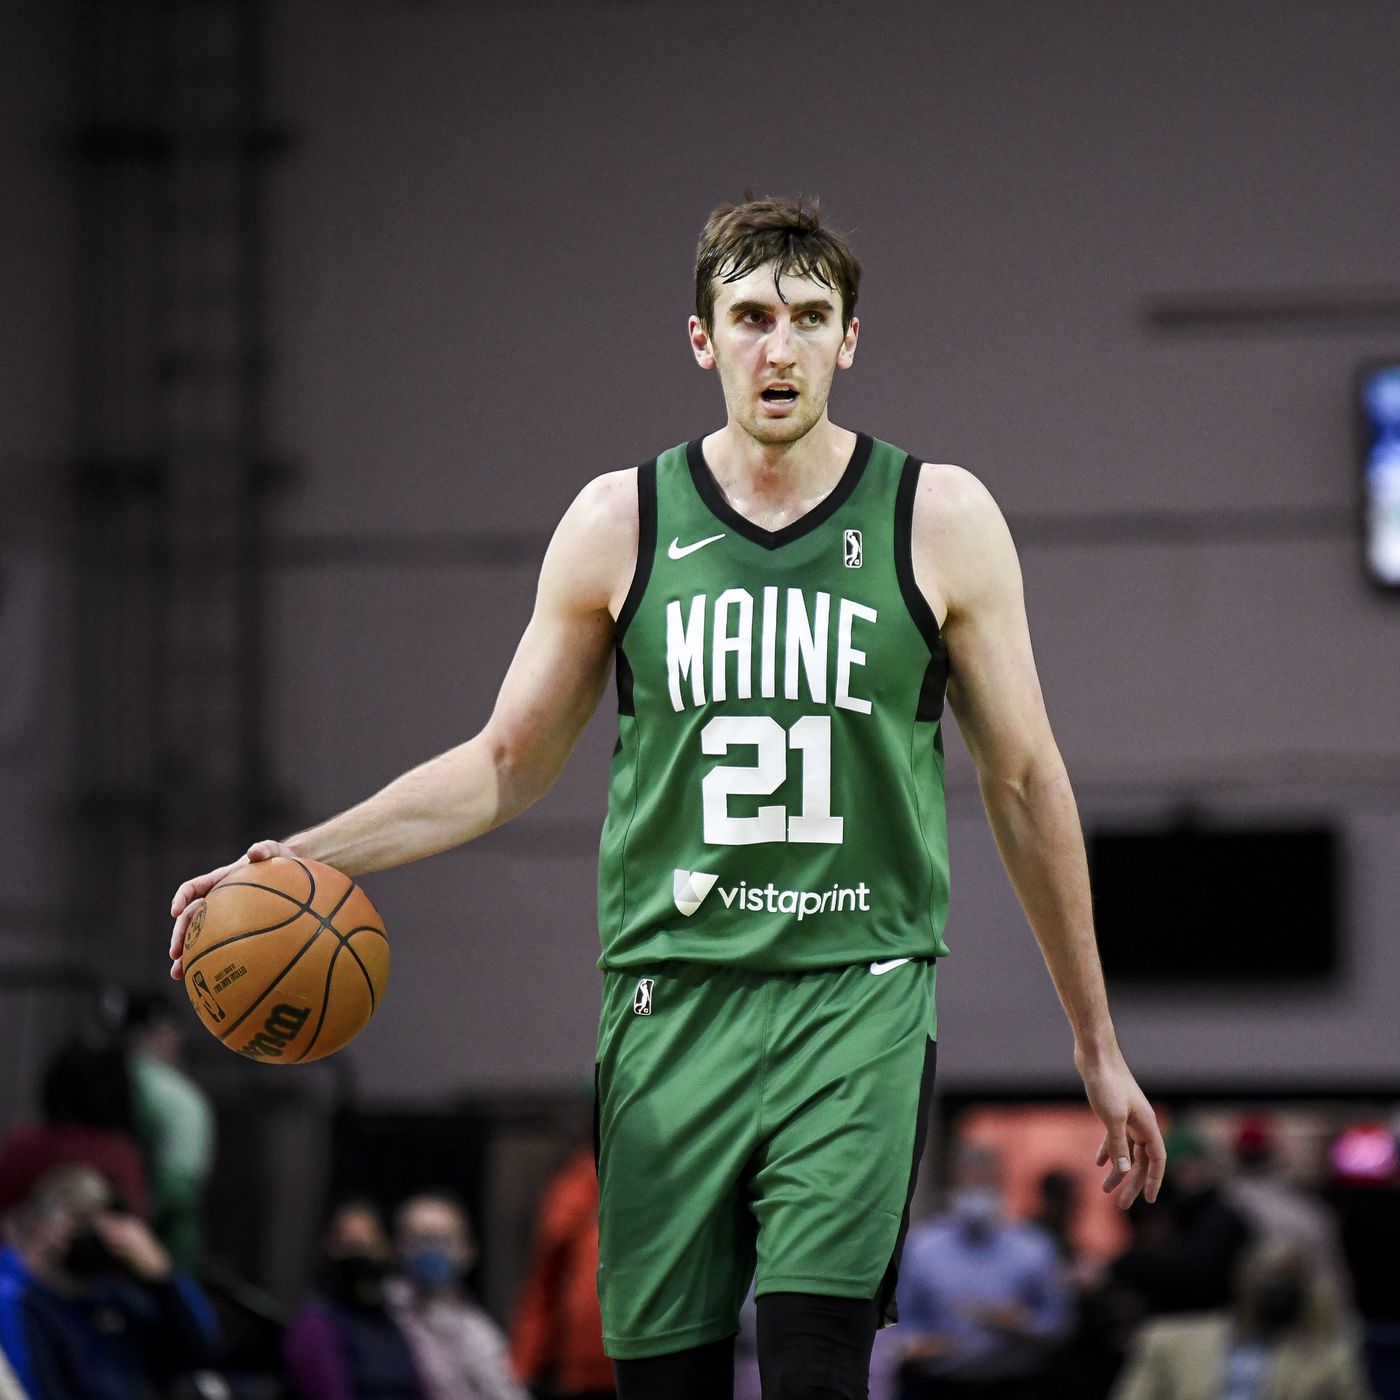 Cavaliers plan to sign G League's Luke Kornet, Justin Anderson to